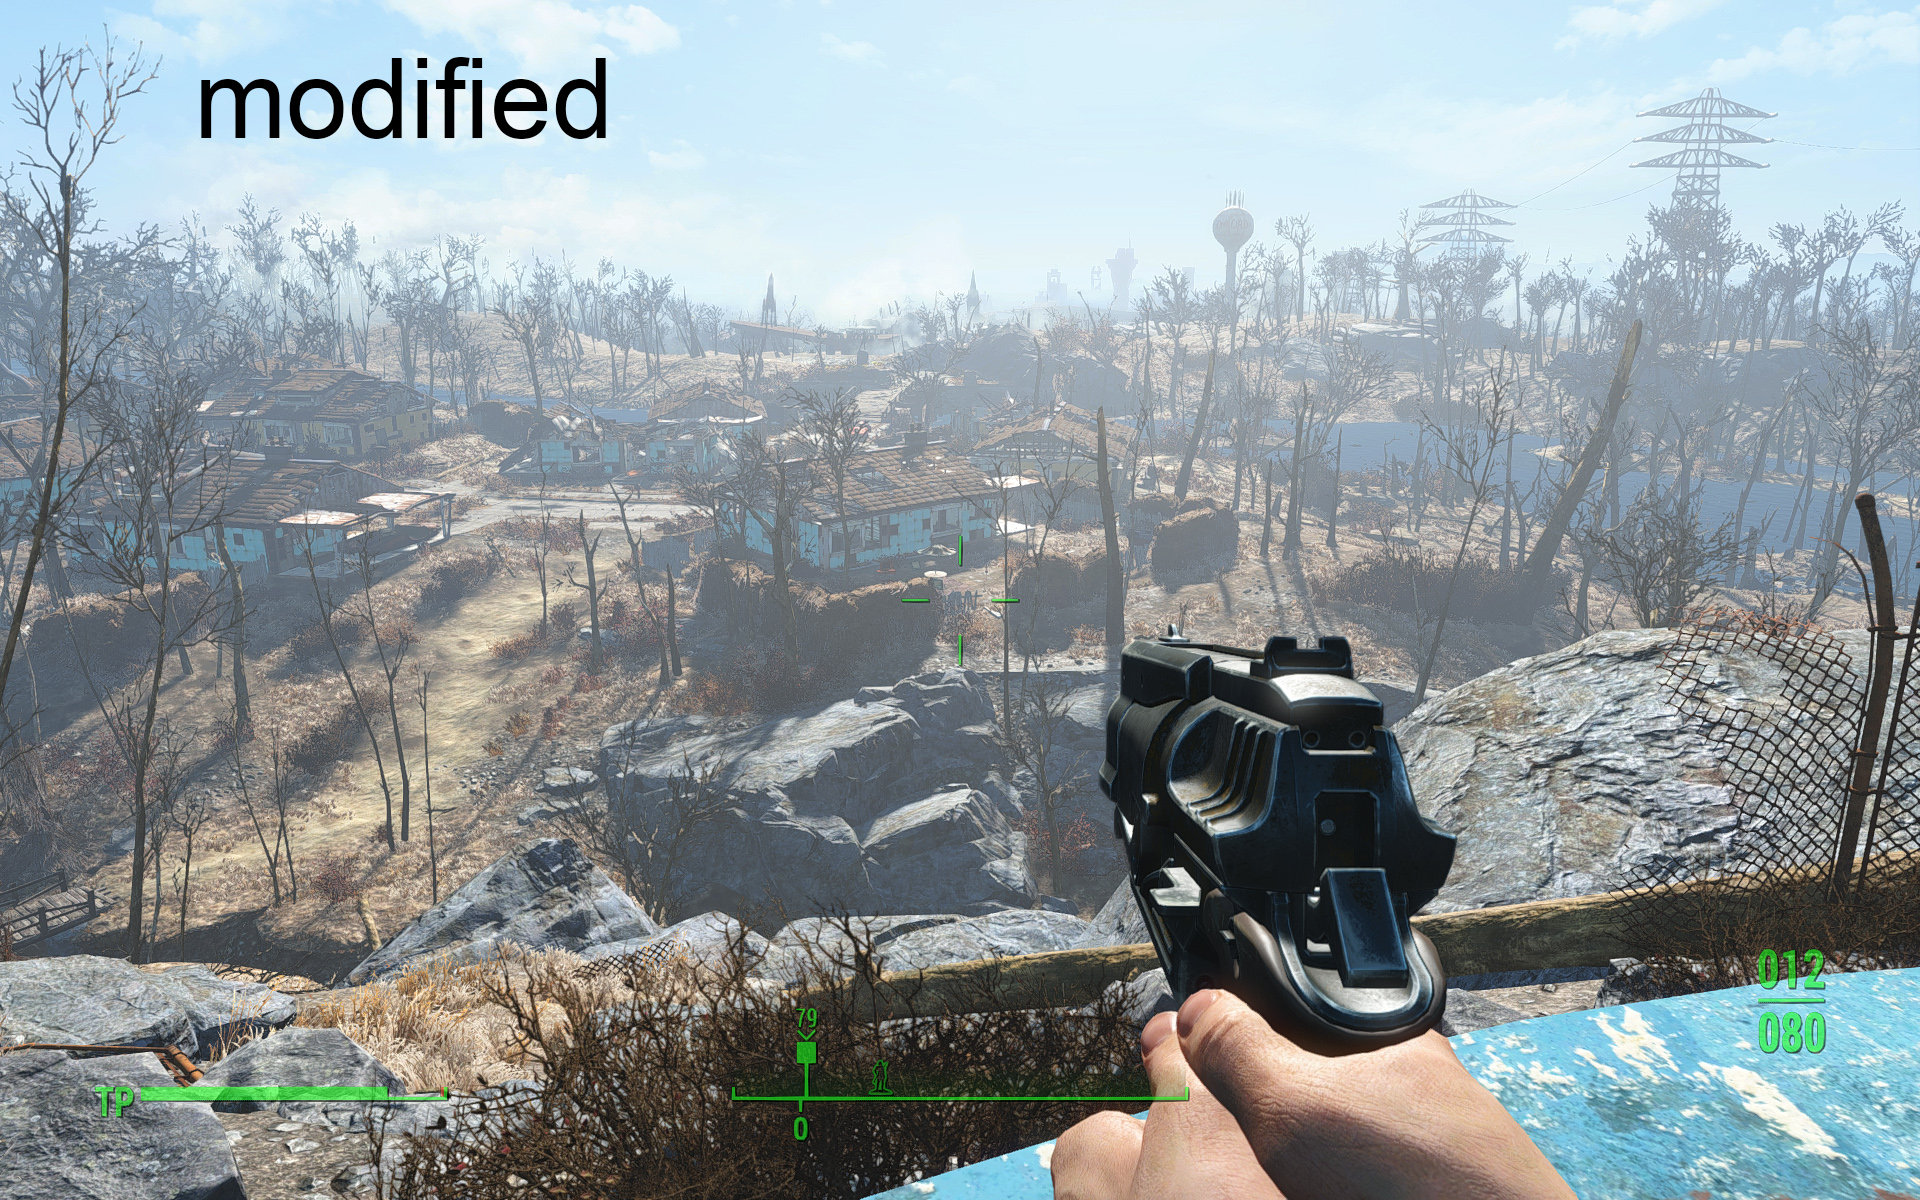 nexus mod manager fallout 4 missing ini